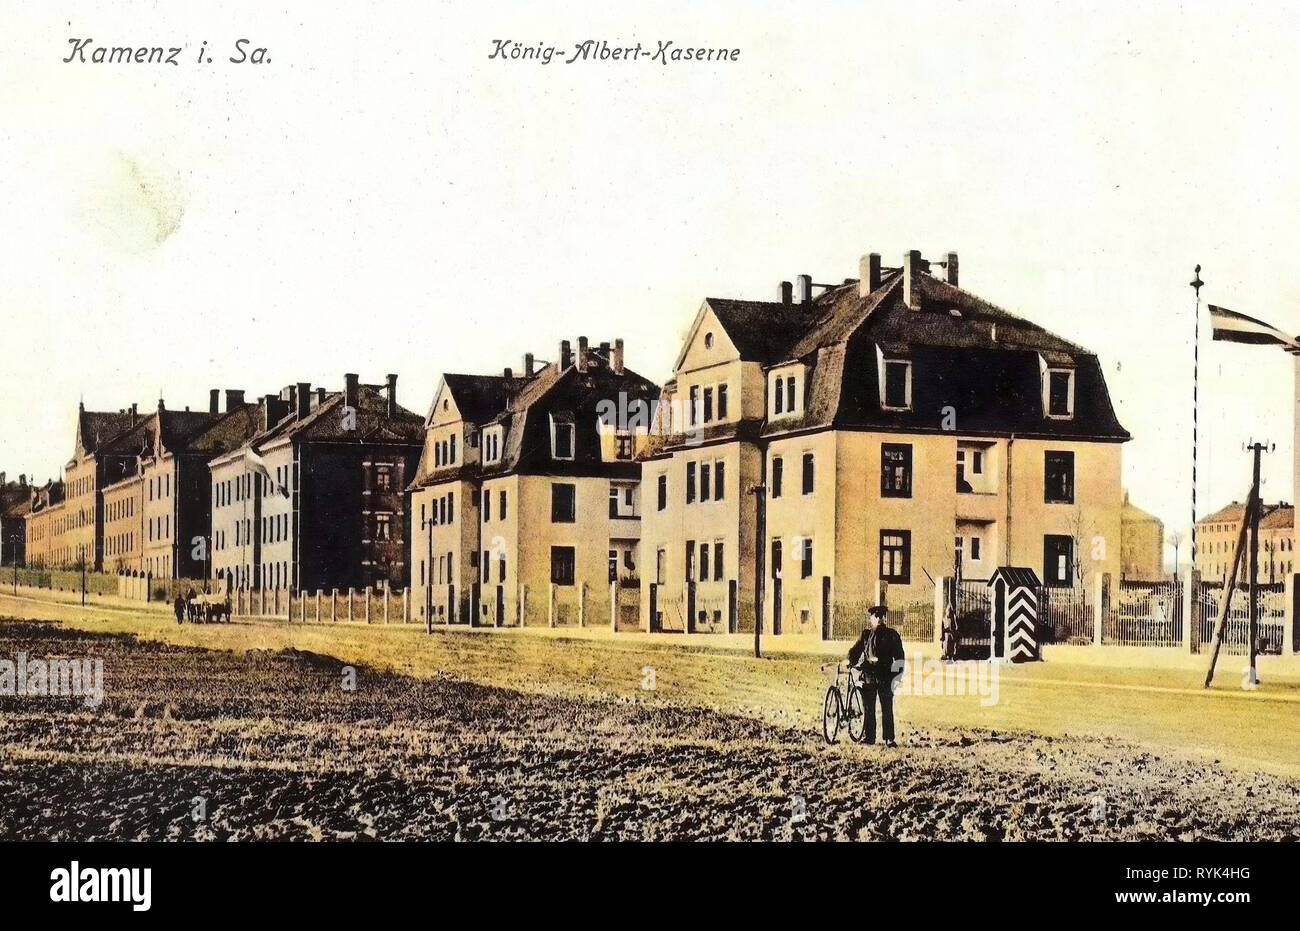 Military facilities of Germany, 13. Königlich Sächsisches Infanterie-Regiment Nr. 178, Sentry boxes in Germany (historical), People with bicycles, Barracks in Saxony, 1915, Landkreis Bautzen, Kamenz, Kaserne des 13. Königlich Sächsischen Infanterie, Regiments Nr. 178 Stock Photo